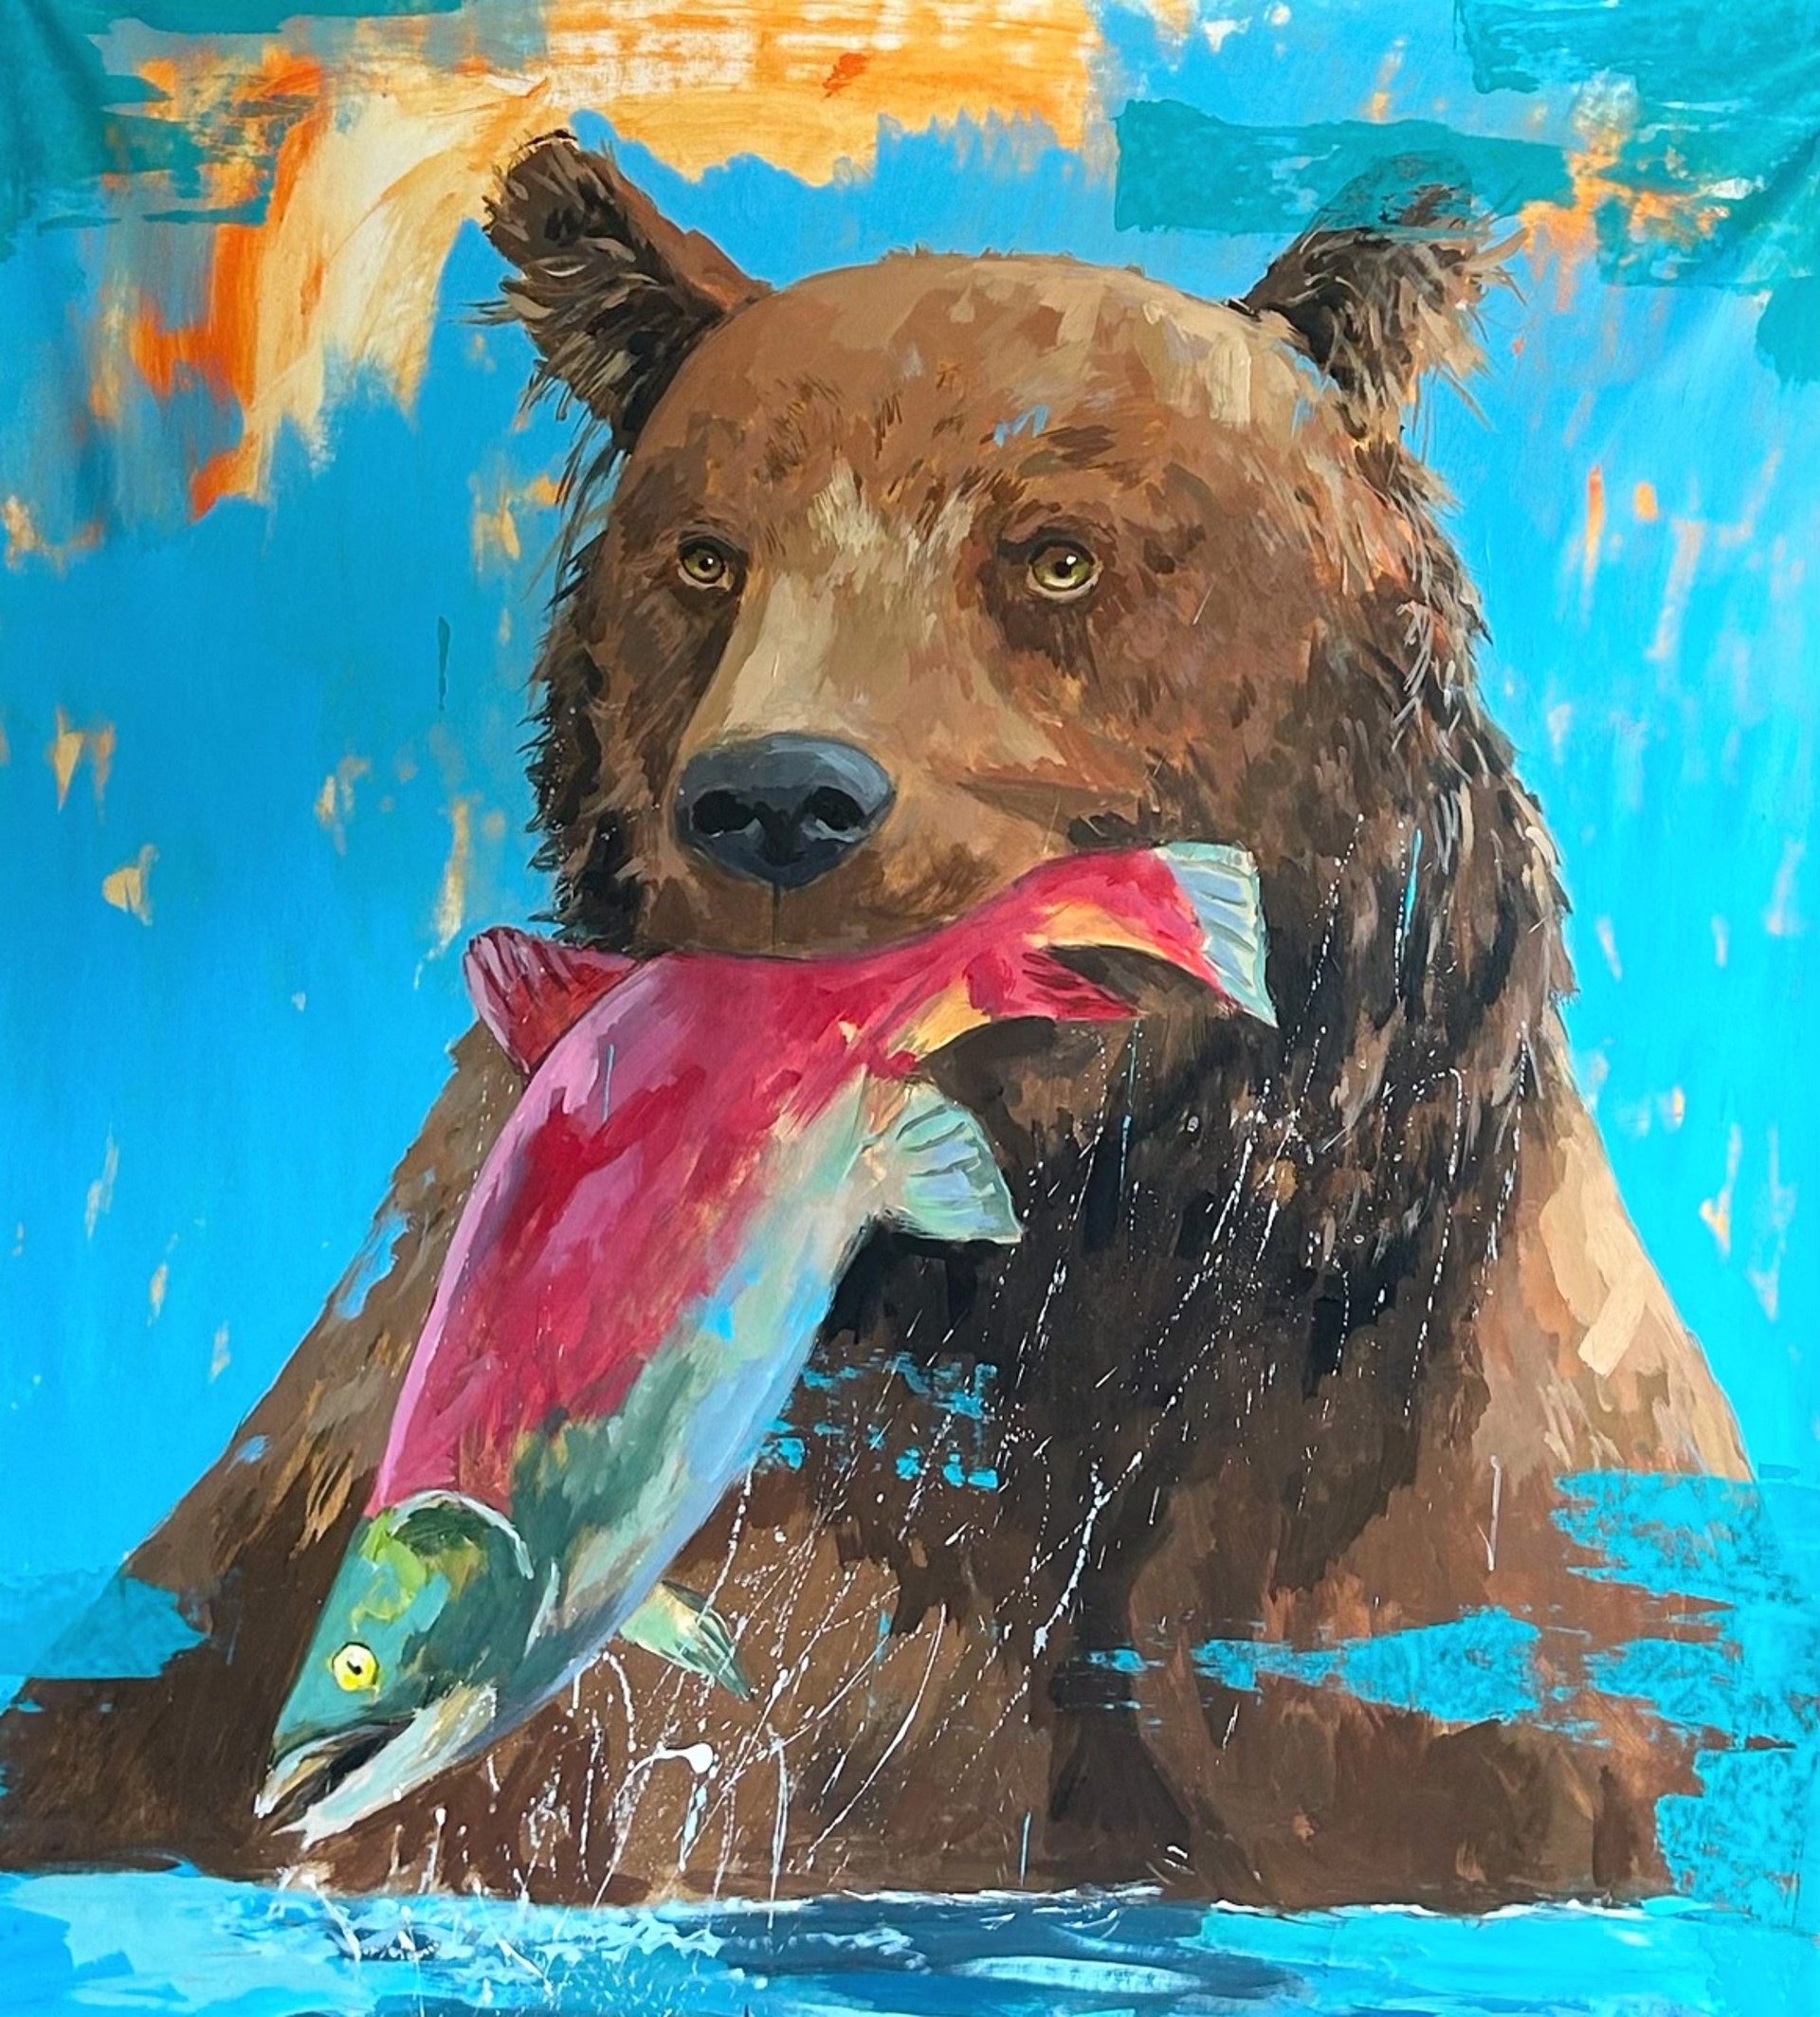 Bear with Fish by Dominic Mattioli